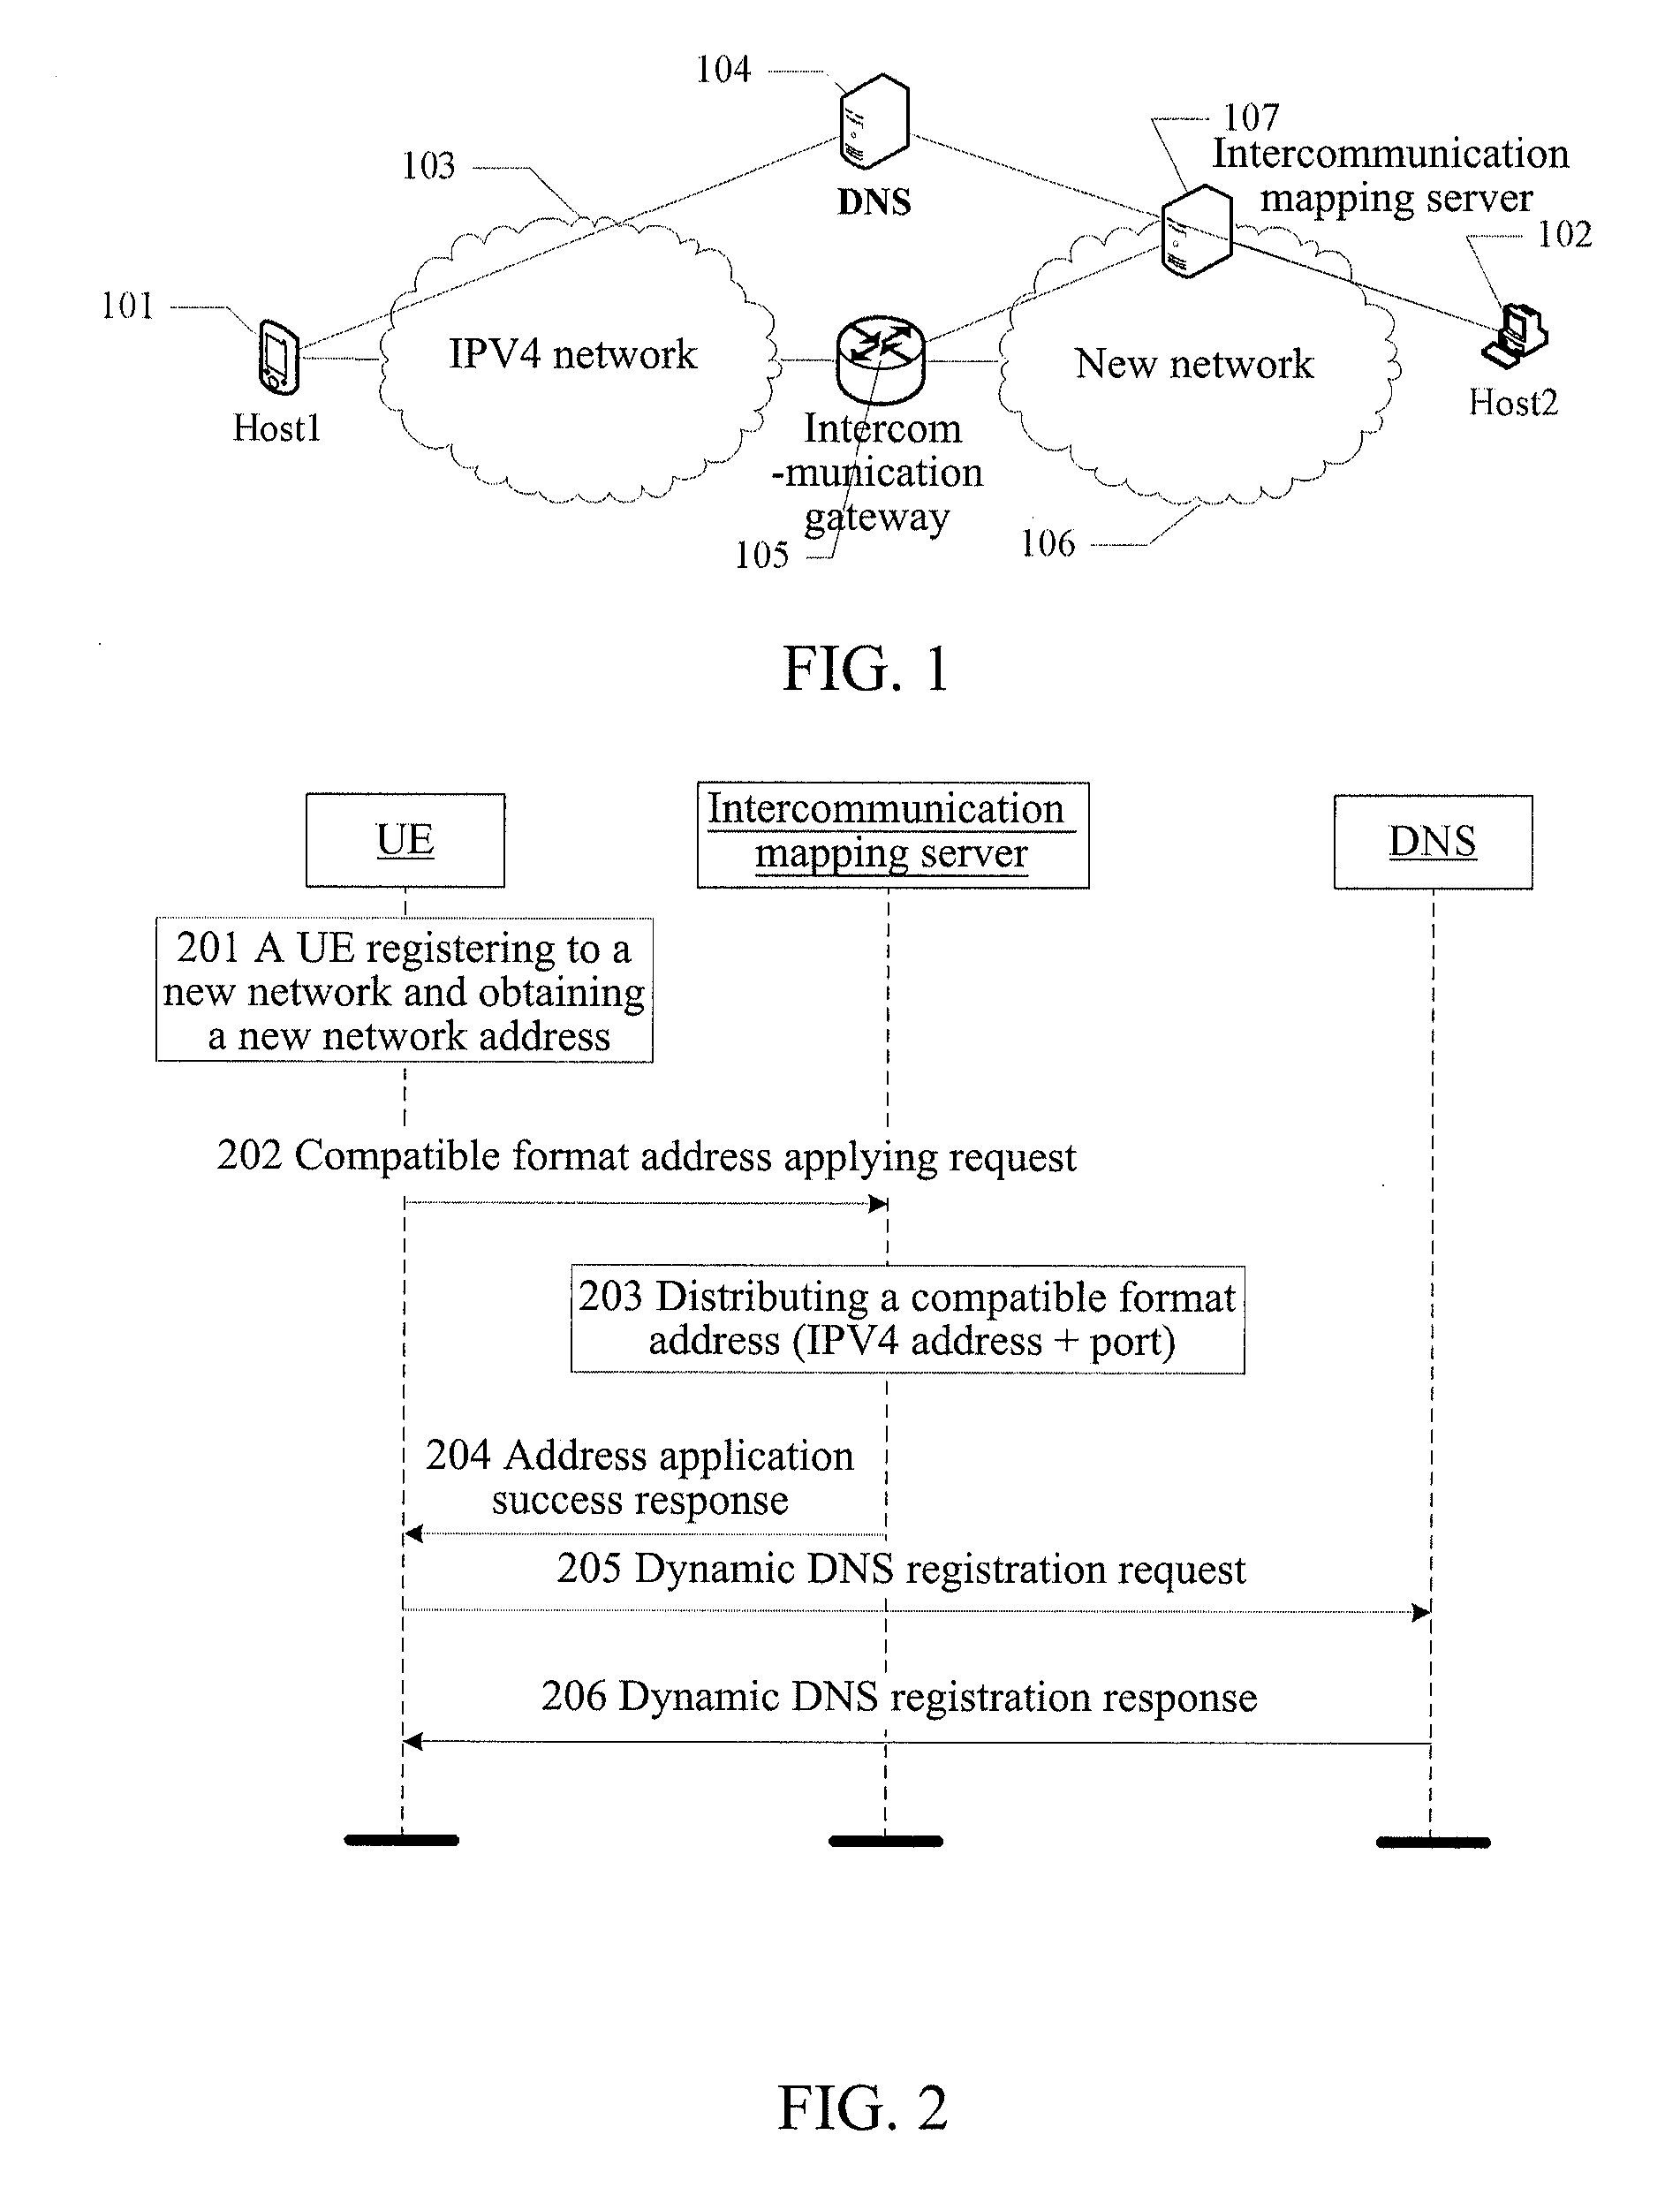 Method and system for implementing interconnection between internet protocol version 4 network and new network